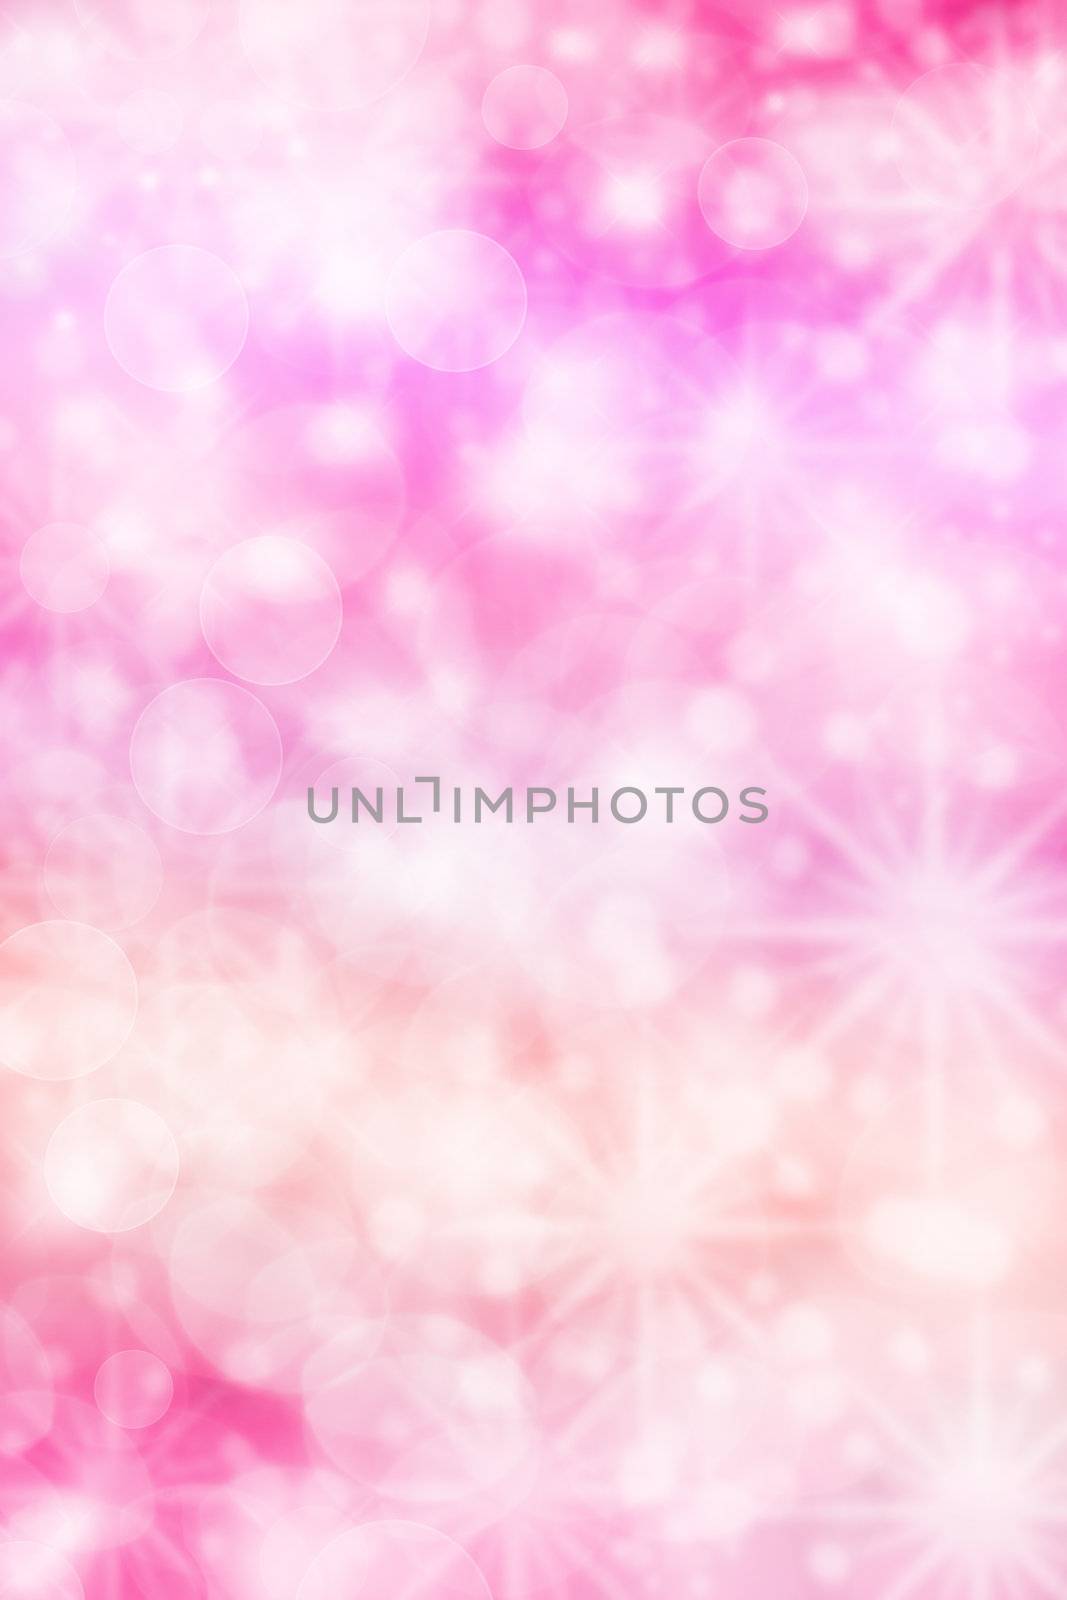 Abstract lights background by melpomene